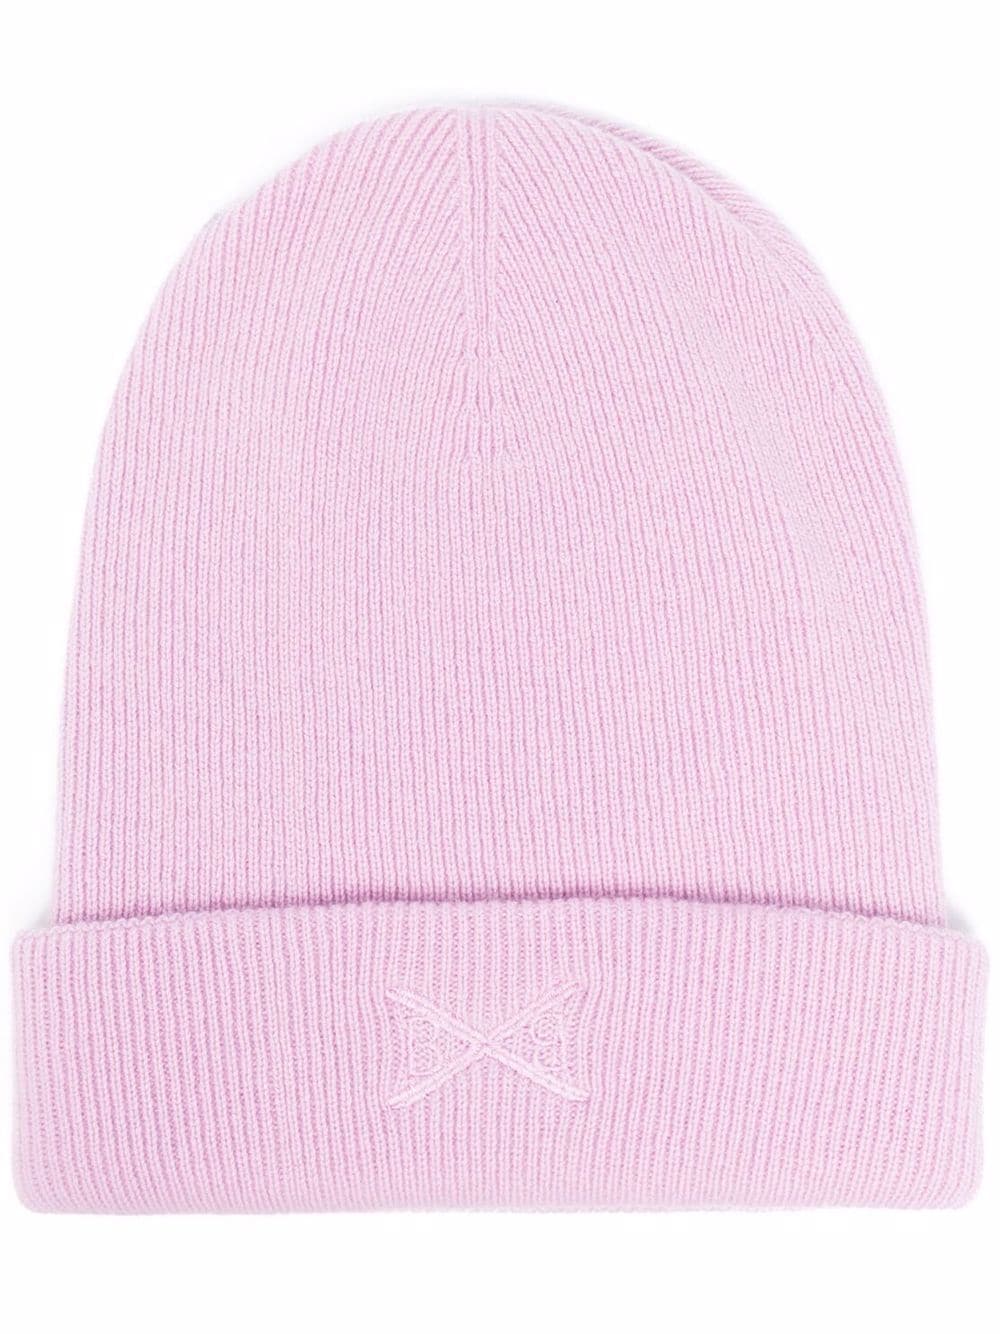 embroidered cashmere beanie